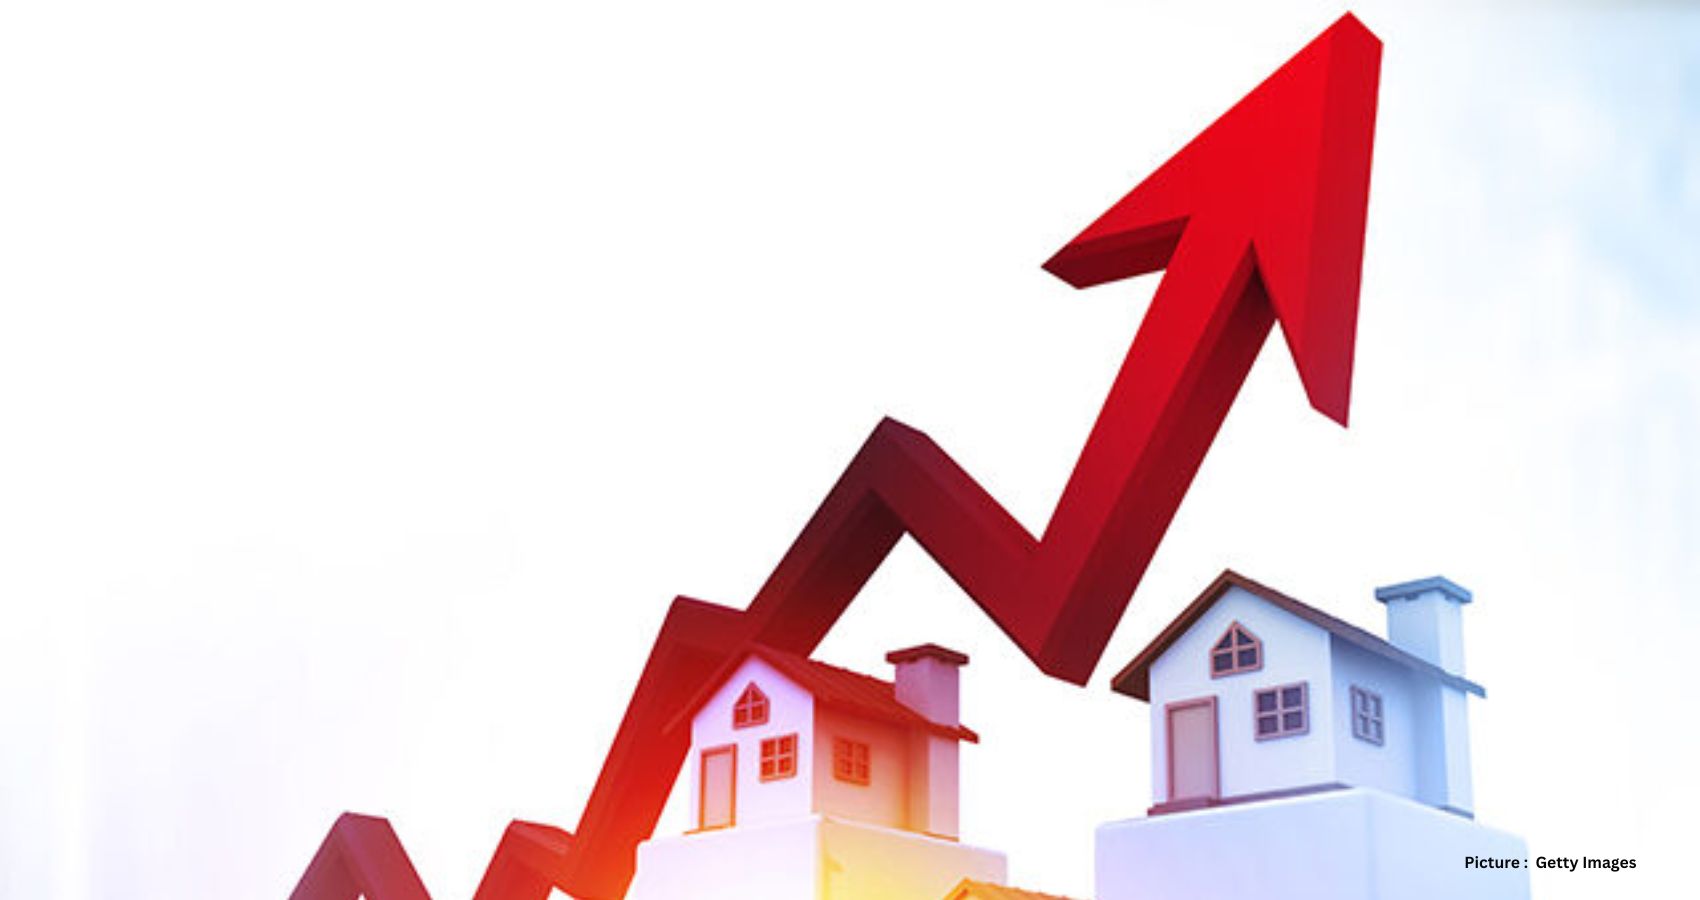 Persistent Home Shortage Fuels Surging Prices Despite Record Mortgage Rates